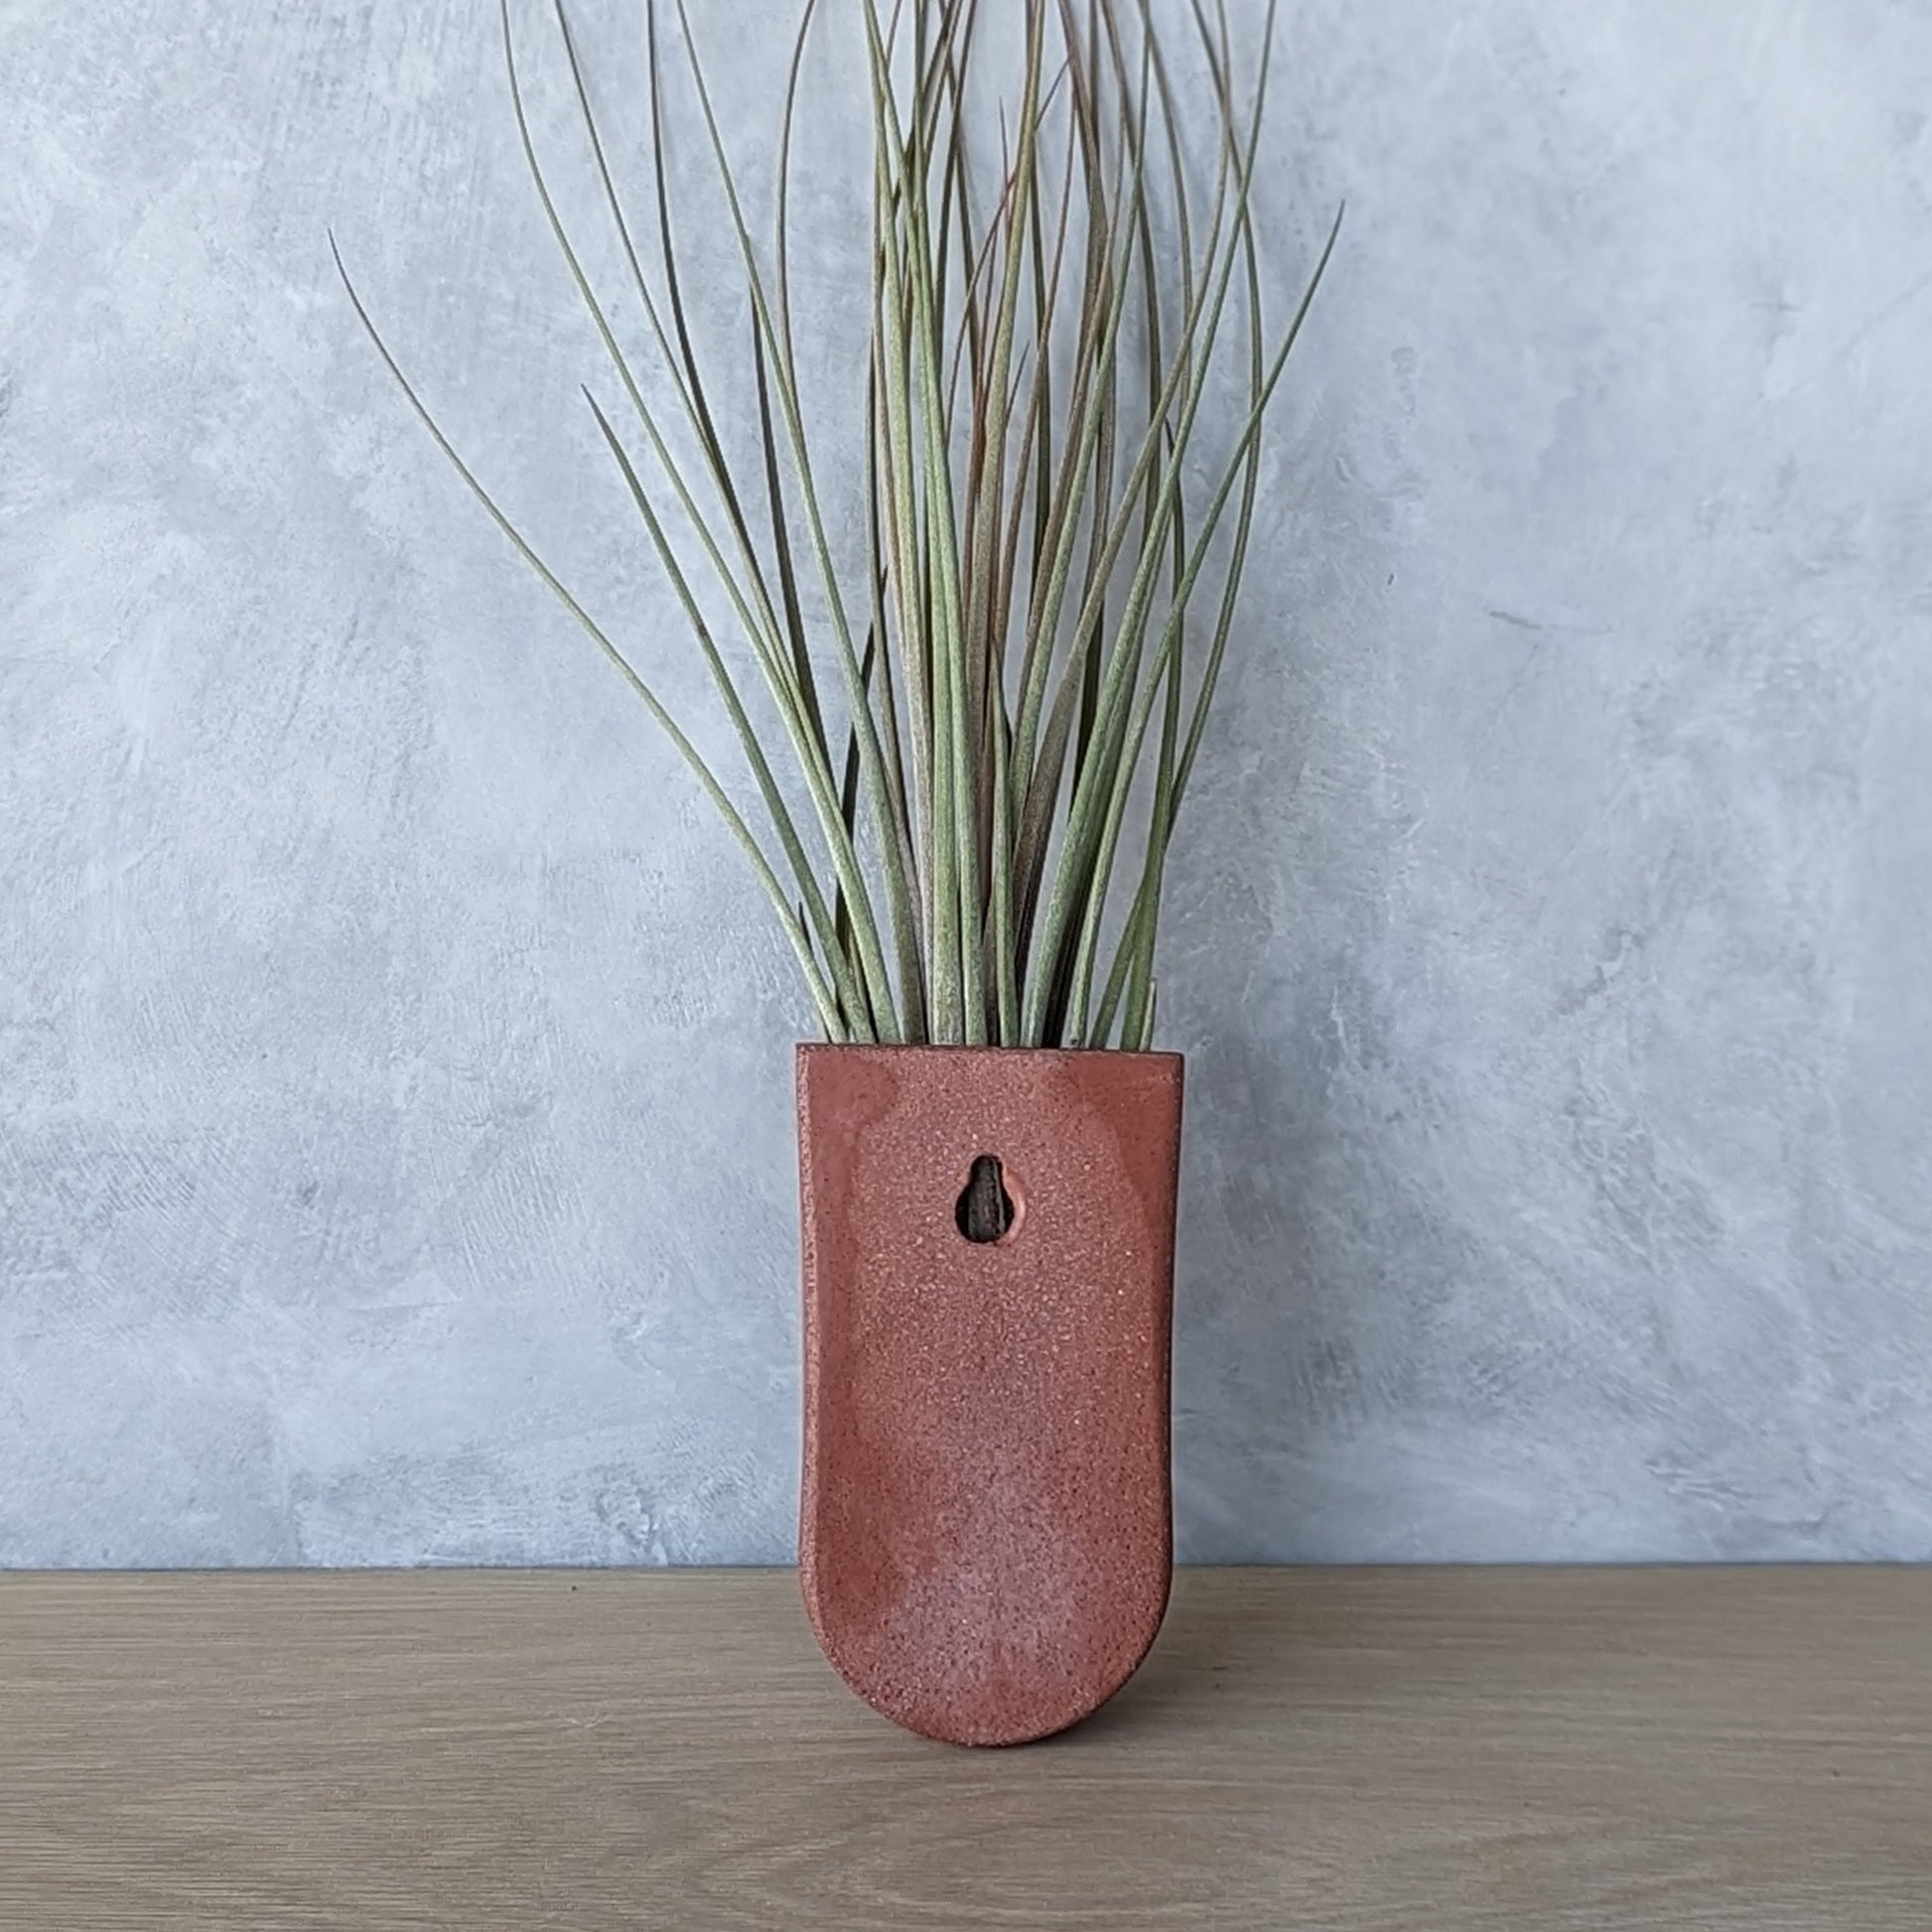 Concrete Wall-Mounted Air Plant Holder